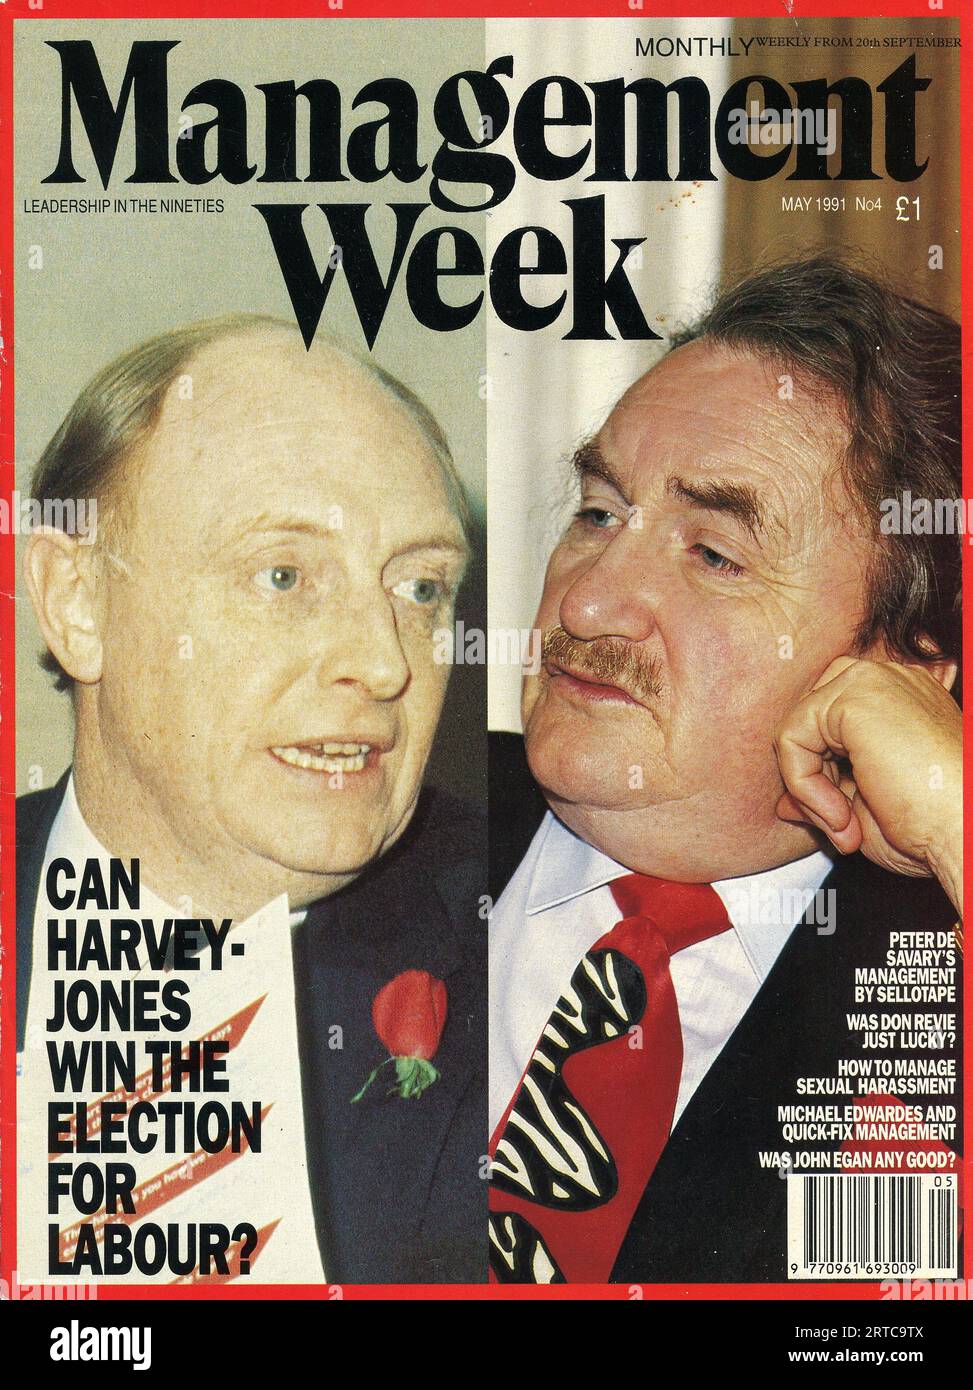 Archive copy of UK business magazine Management Week published in May 1991. Launched in 1991, the magazine was relaunched as Business Age in 1992. Stock Photo